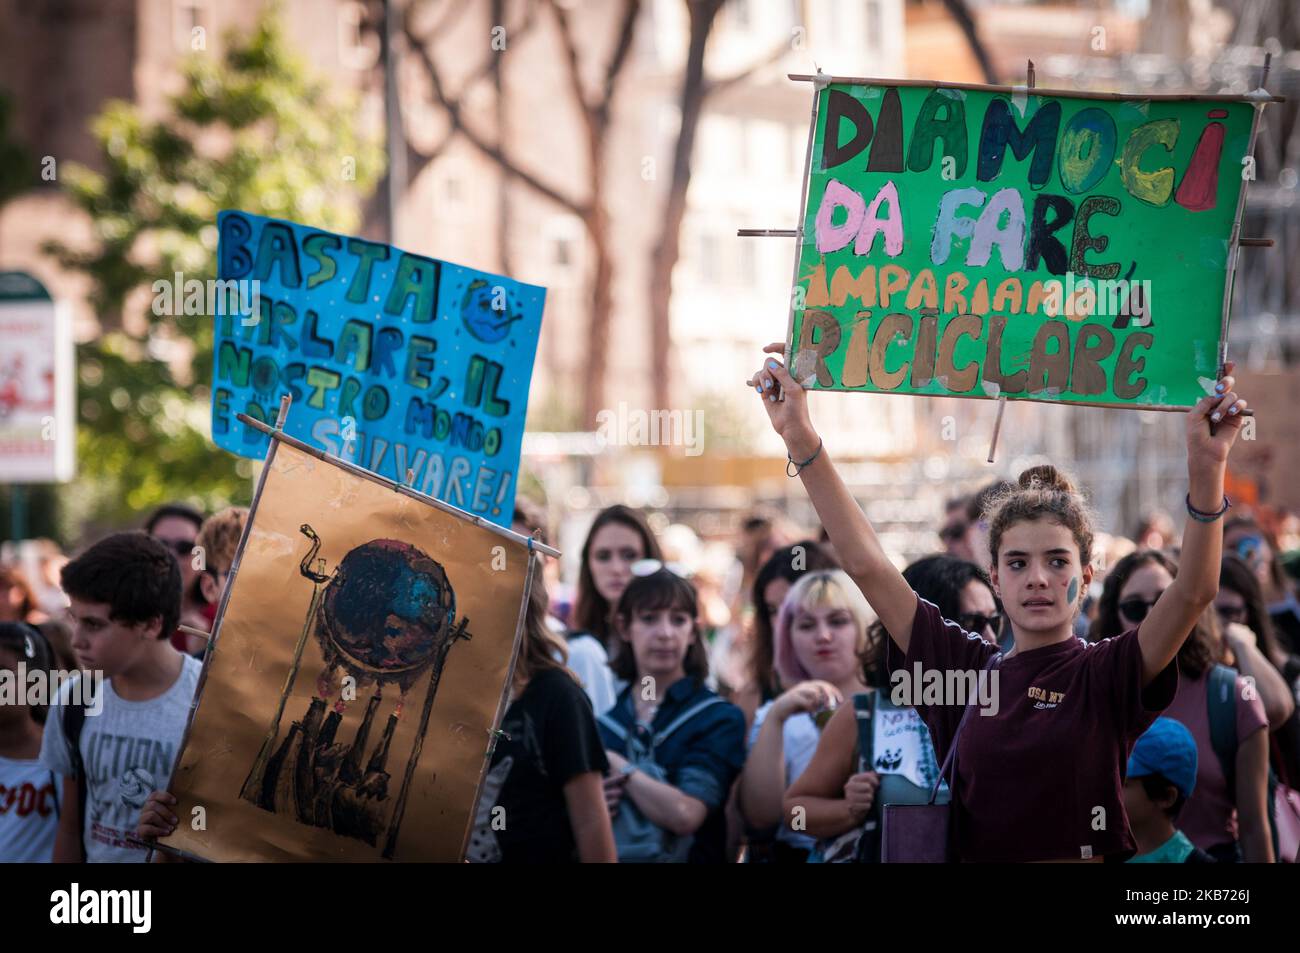 Students demonstrate during a worldwide protest demanding action on climate change, in Rome, Friday, Sept. 27, 2019. The protests are inspired by Swedish teenager Greta Thunberg, who spoke to world leaders at a United Nations summit this week. Writing on banner reads in Italian' "Change the system, not the climateon. September 27, 2019 in Rome, Italy. (Photo by Andrea Ronchini/NurPhoto) Stock Photo